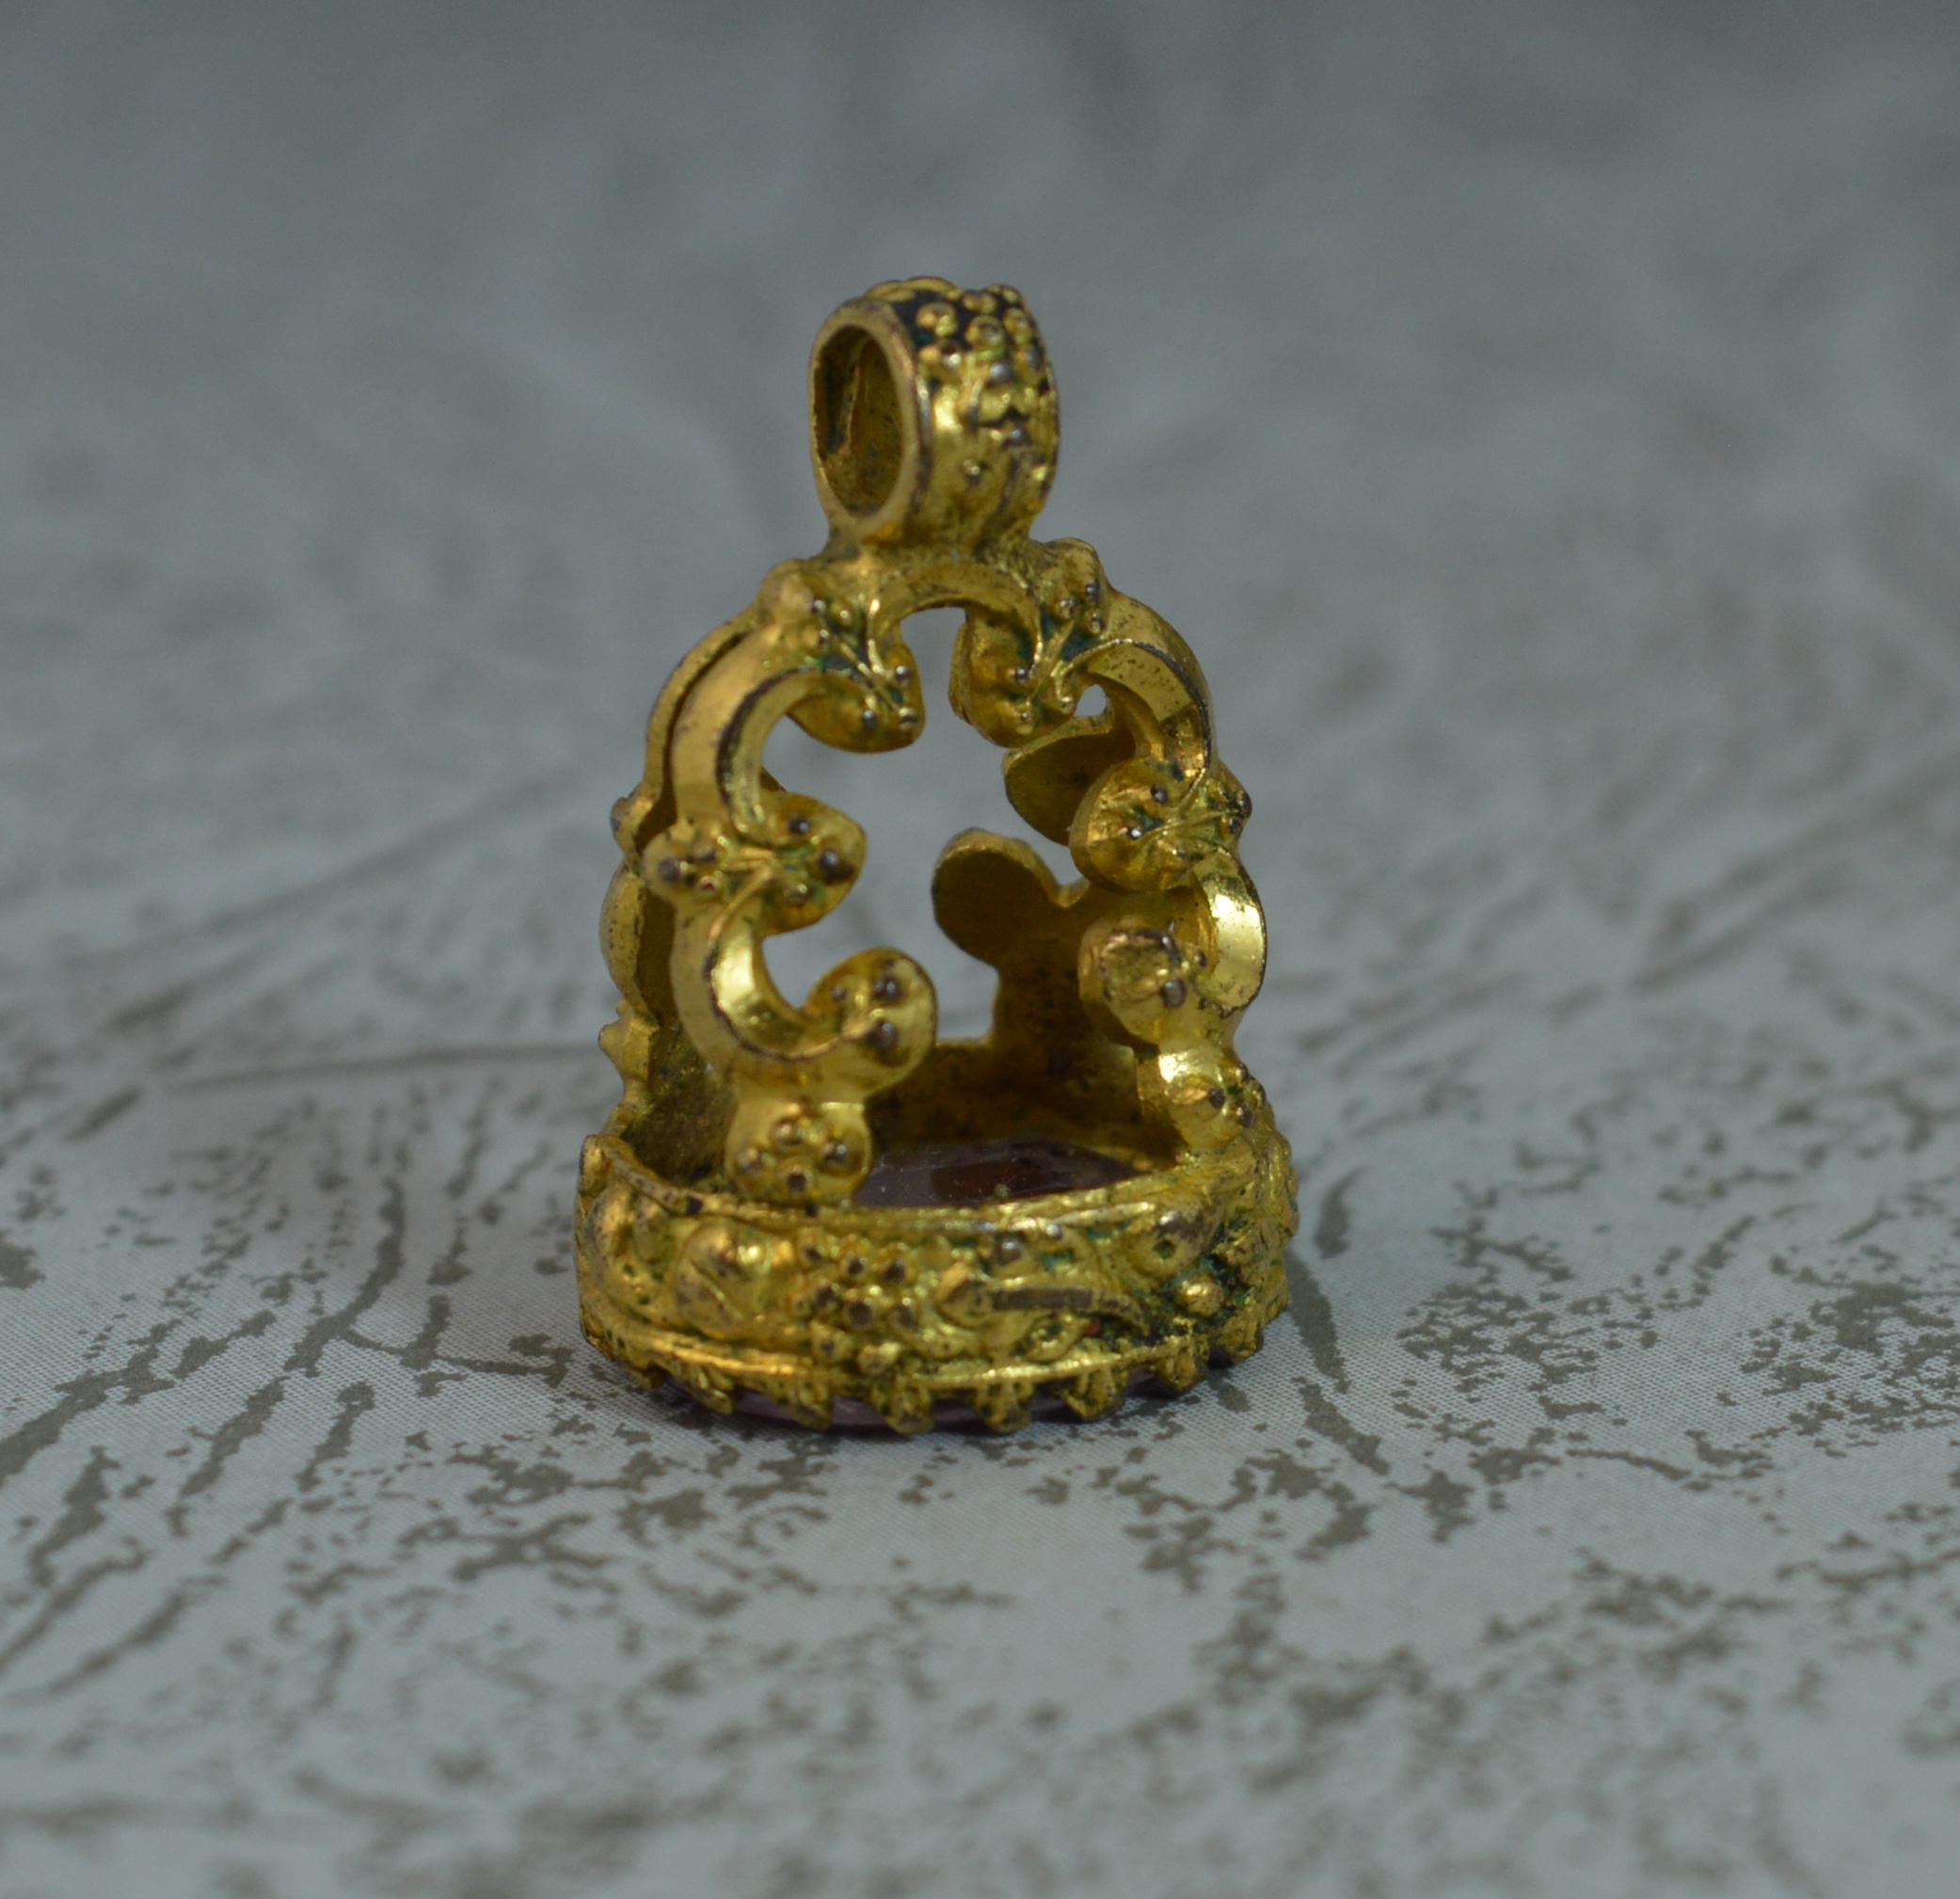 A true antique fob seal intaglio pendant. c1830.
Pinchbeck example.
Set with an oval amethyst to the base. Hand carved intaglio with a cherub.

Condition ; Very good. Crisp design. Well set stone, crisp intaglio. Please view photographs.
Hallmarks ;